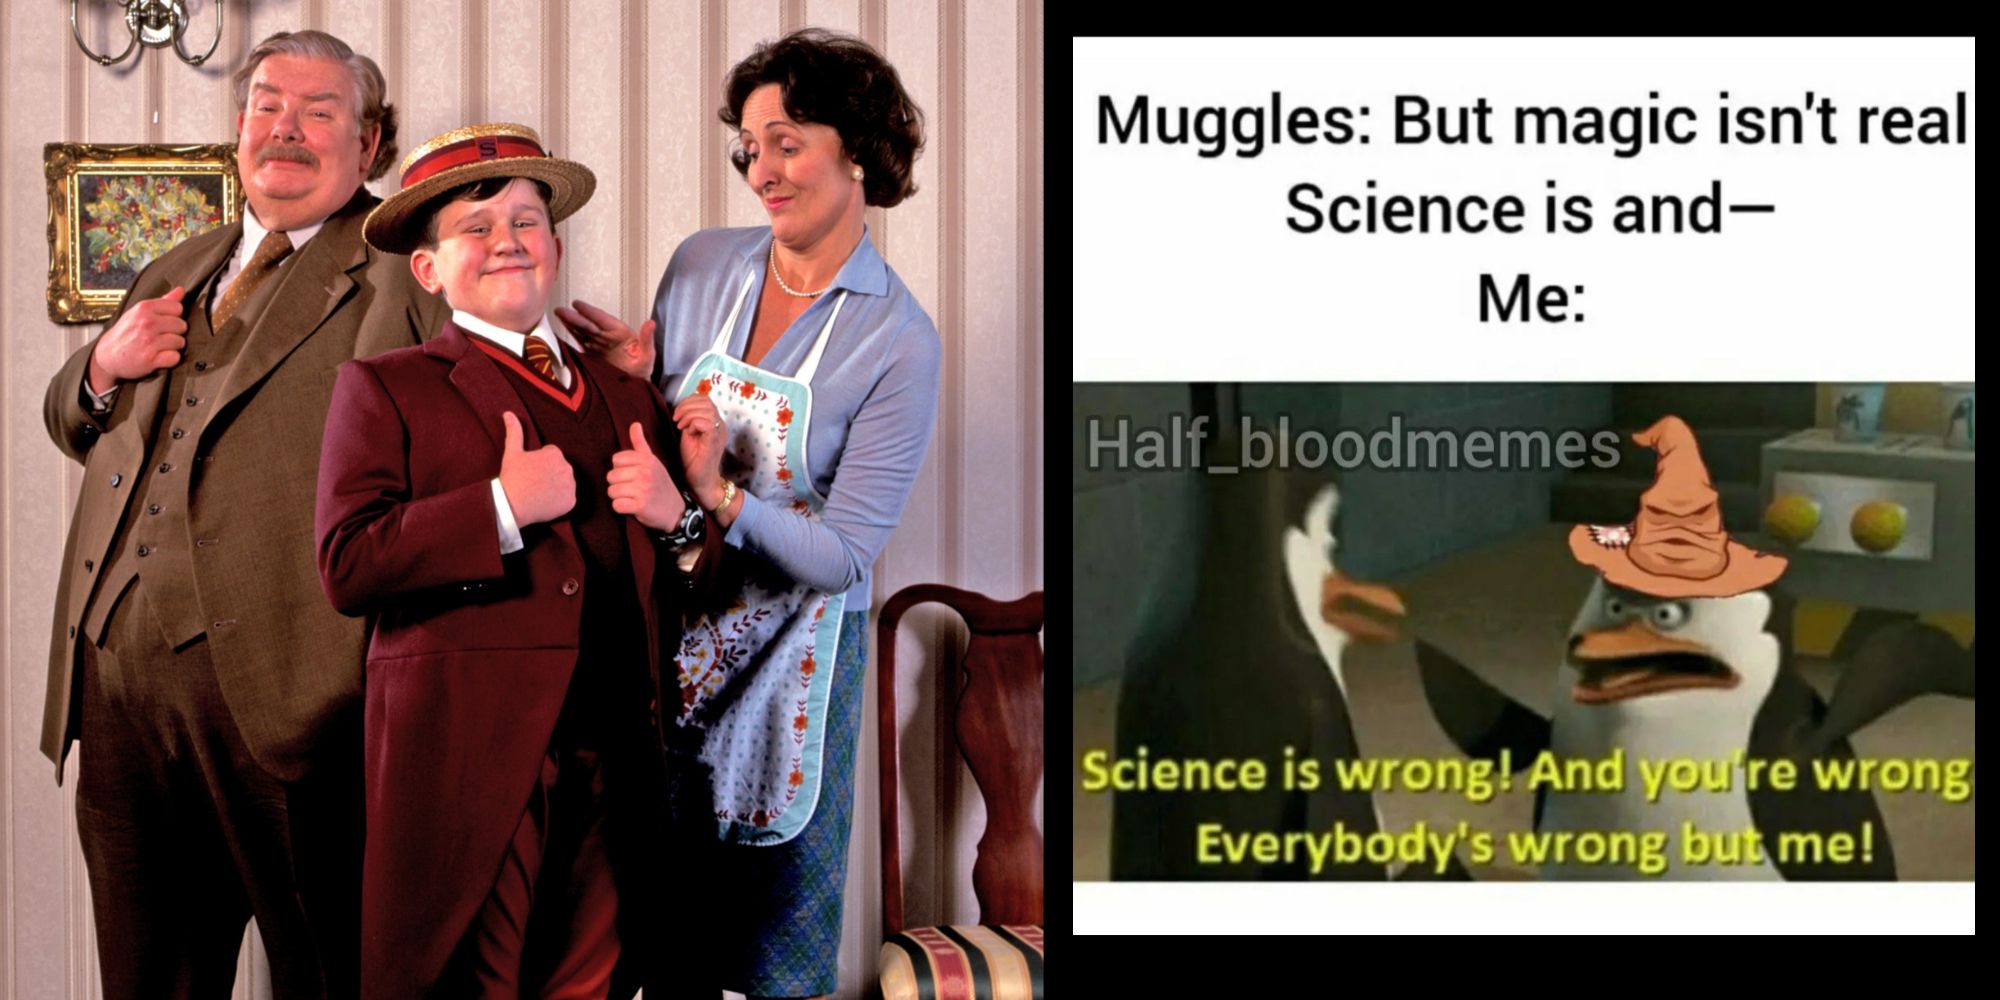 Split Image of the Dursleys from Harry Potter and a meme about Muggles